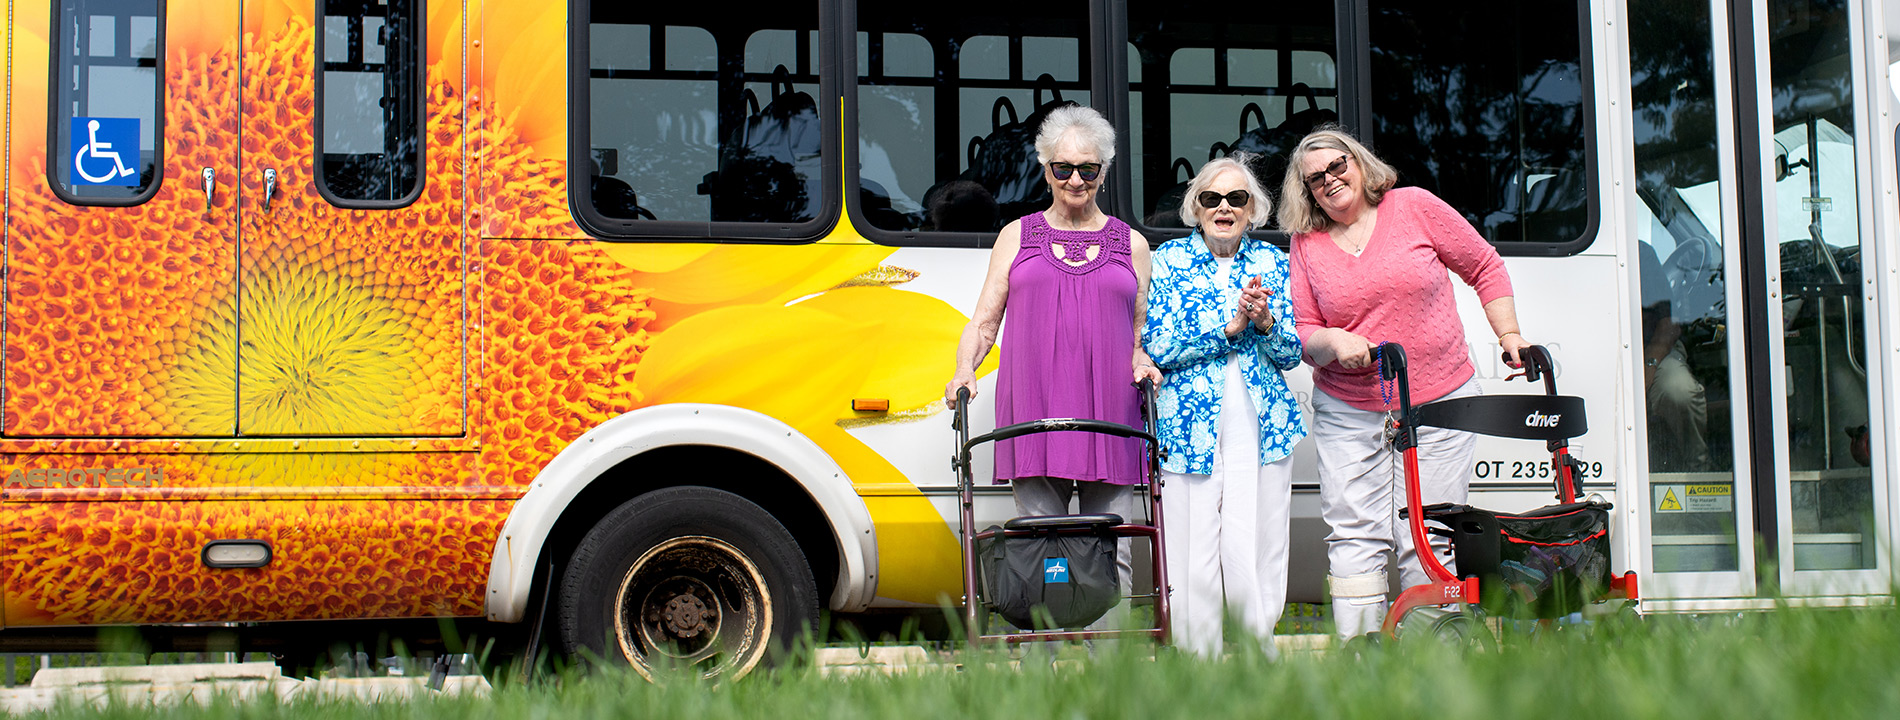 three elderly ladies wearing sunglasses standing in front of a bus